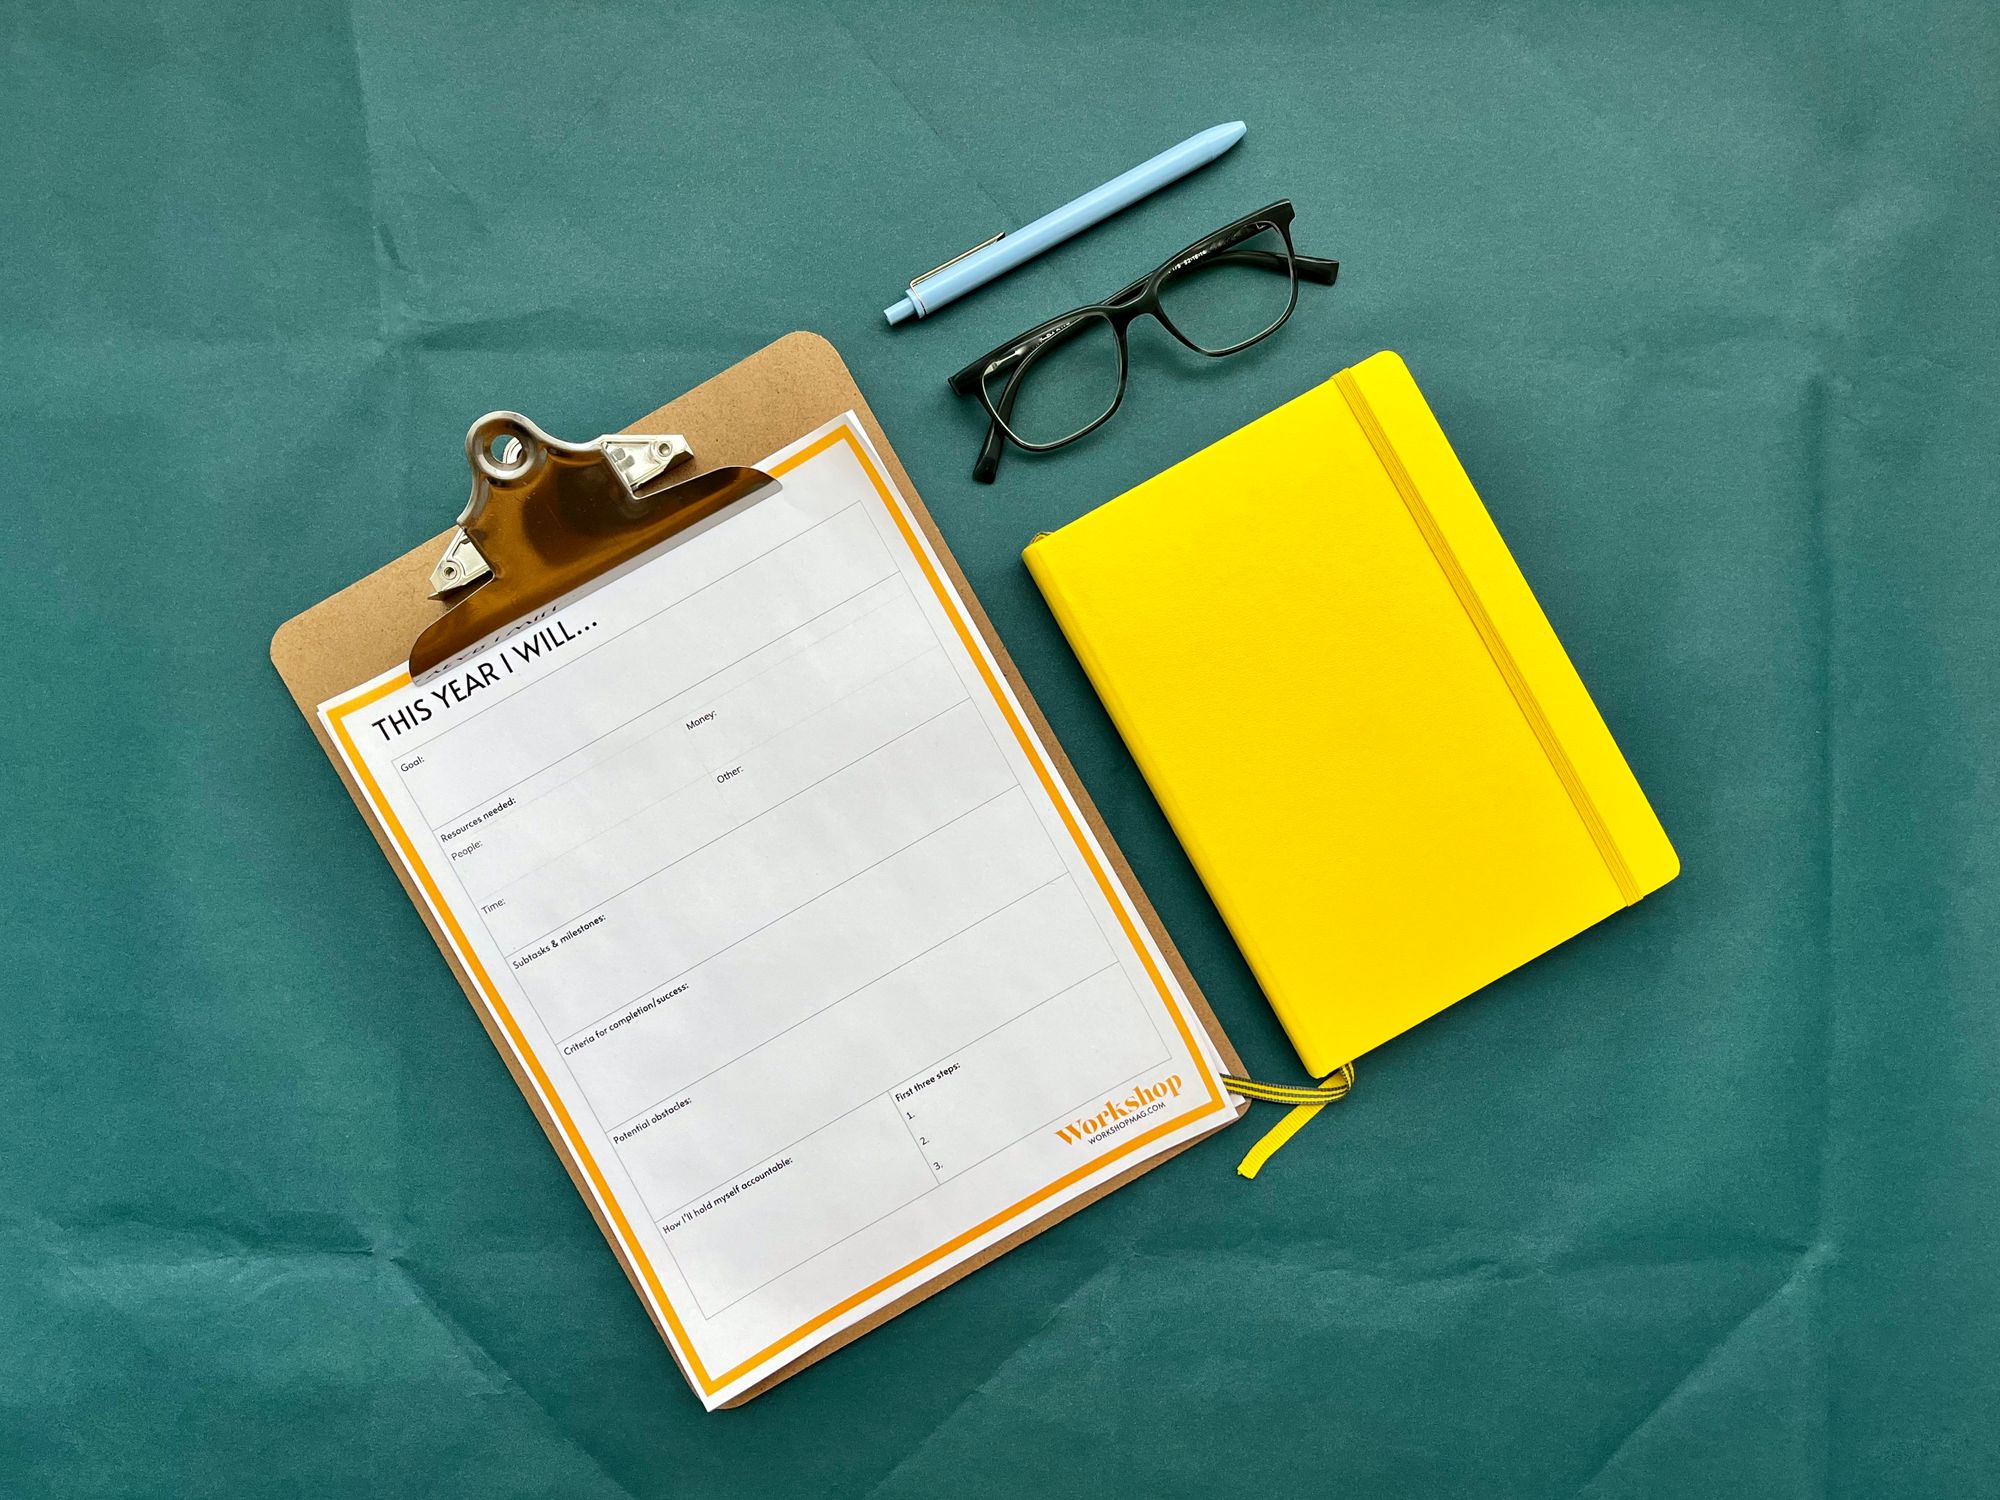 A notebook, a pair of glasses, a pen, and a clipboard holding a goal-setting workshee